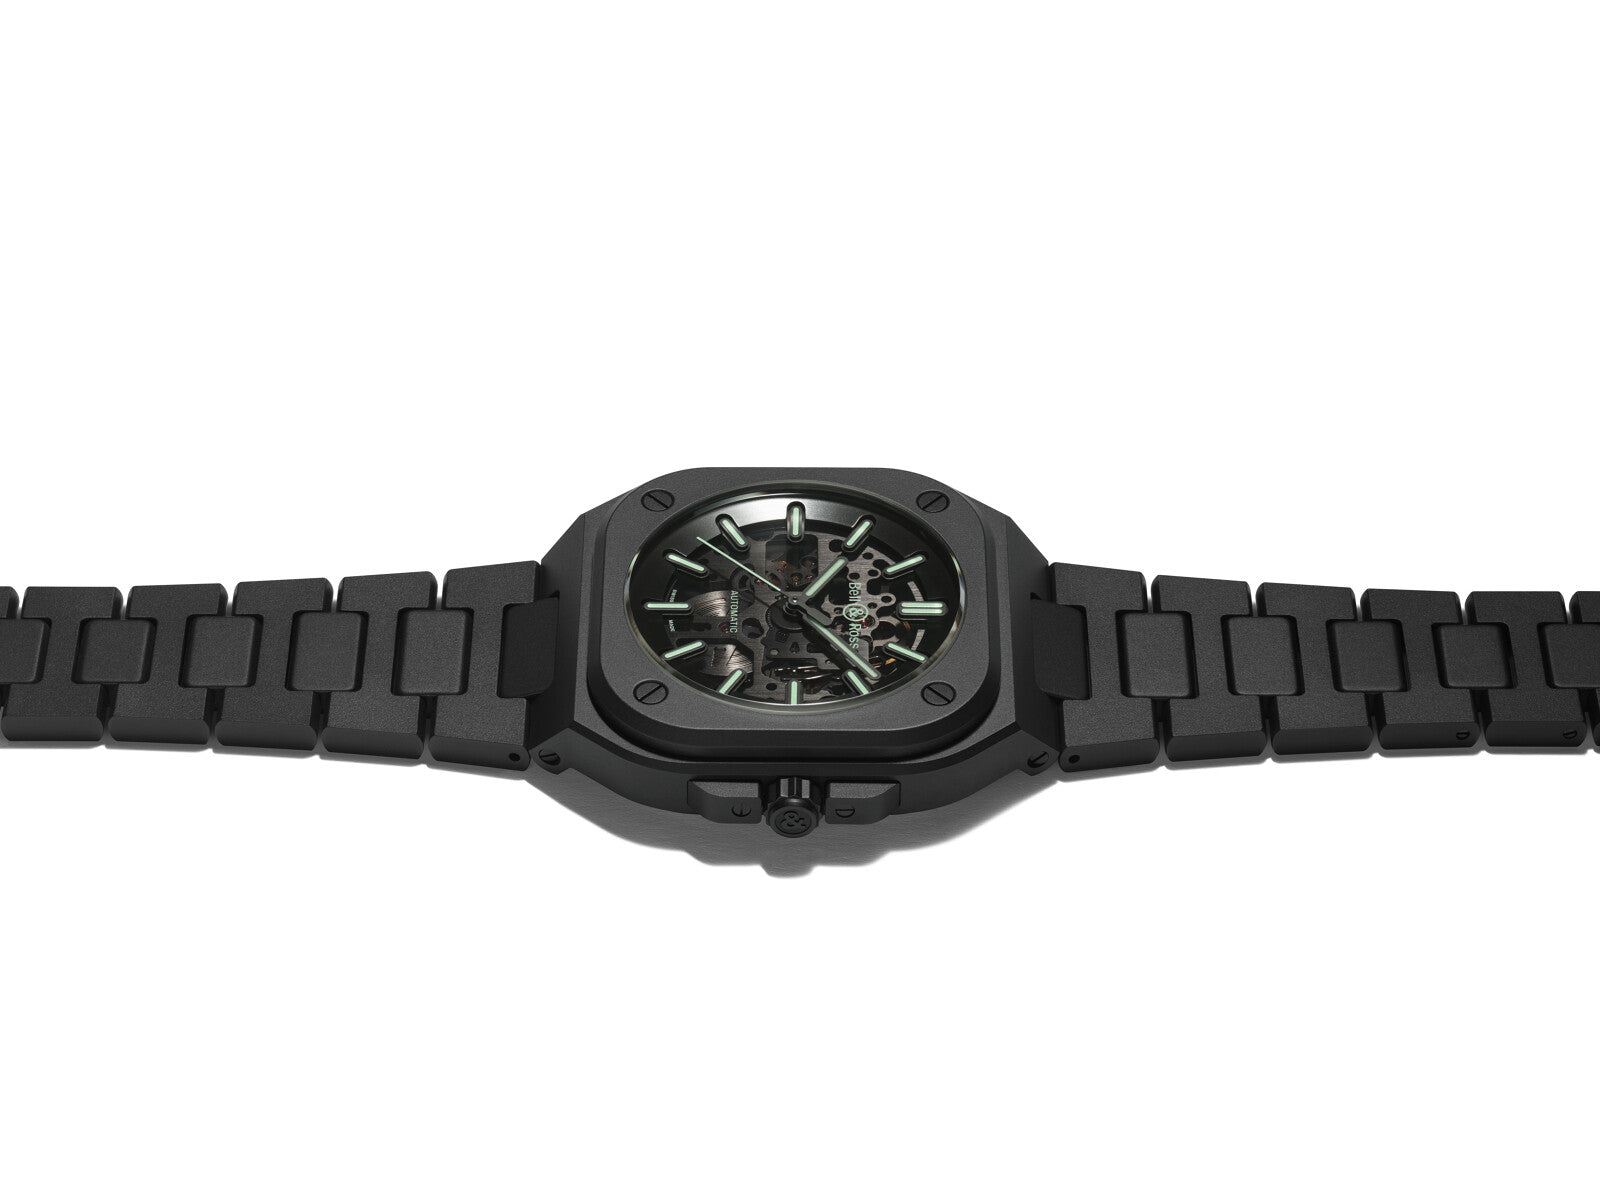 Bell & Ross BR 05 Skeleton Black Lum Ceramic Limited Edition Automatic (Black Dial / 41mm)